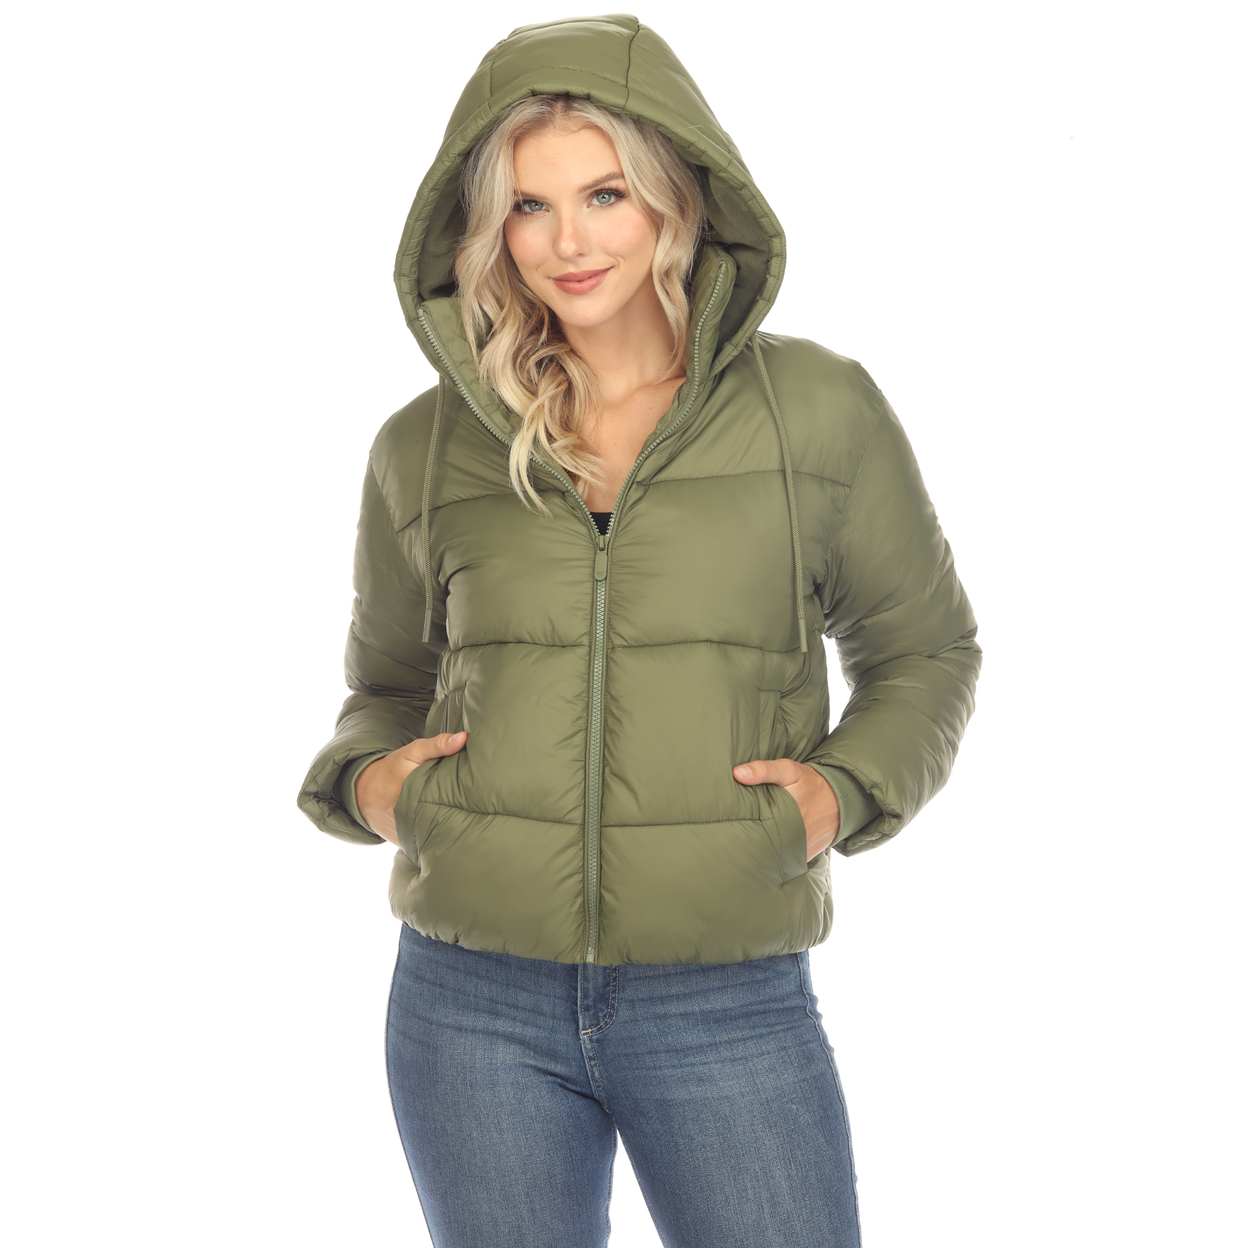 White Mark Women's Zip Hooded Puffer Jacket With Pockets - Olive, Medium